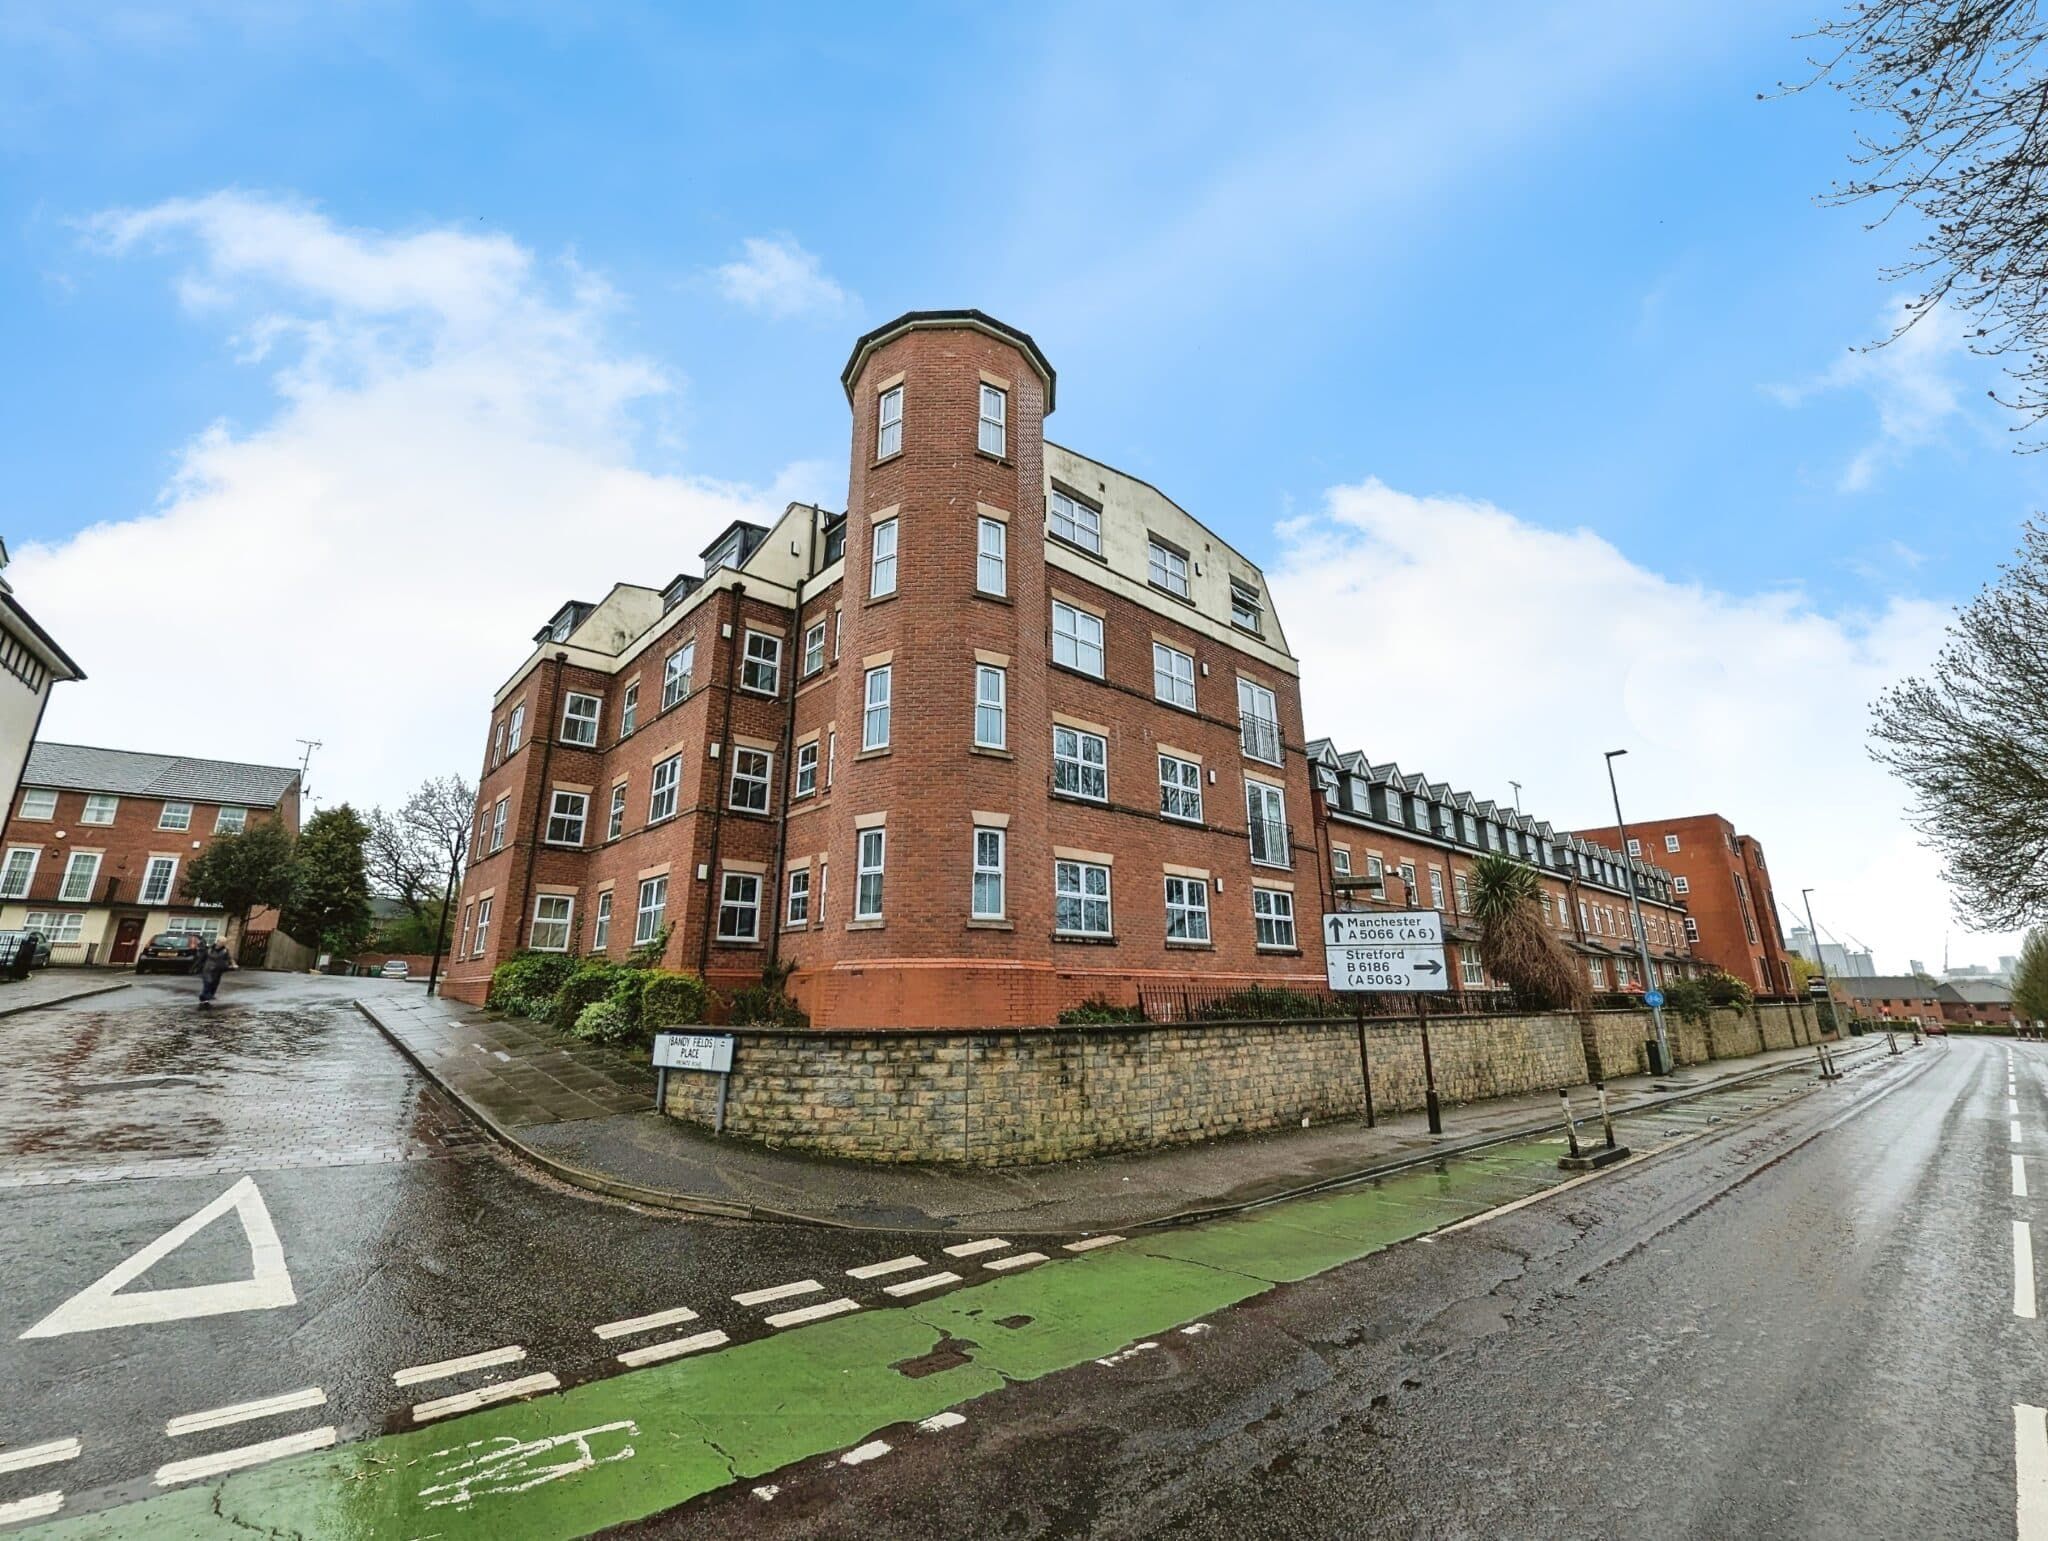 Apartment 6, 224 Great Clowes Street, Salford, Salford, M7 2ZS